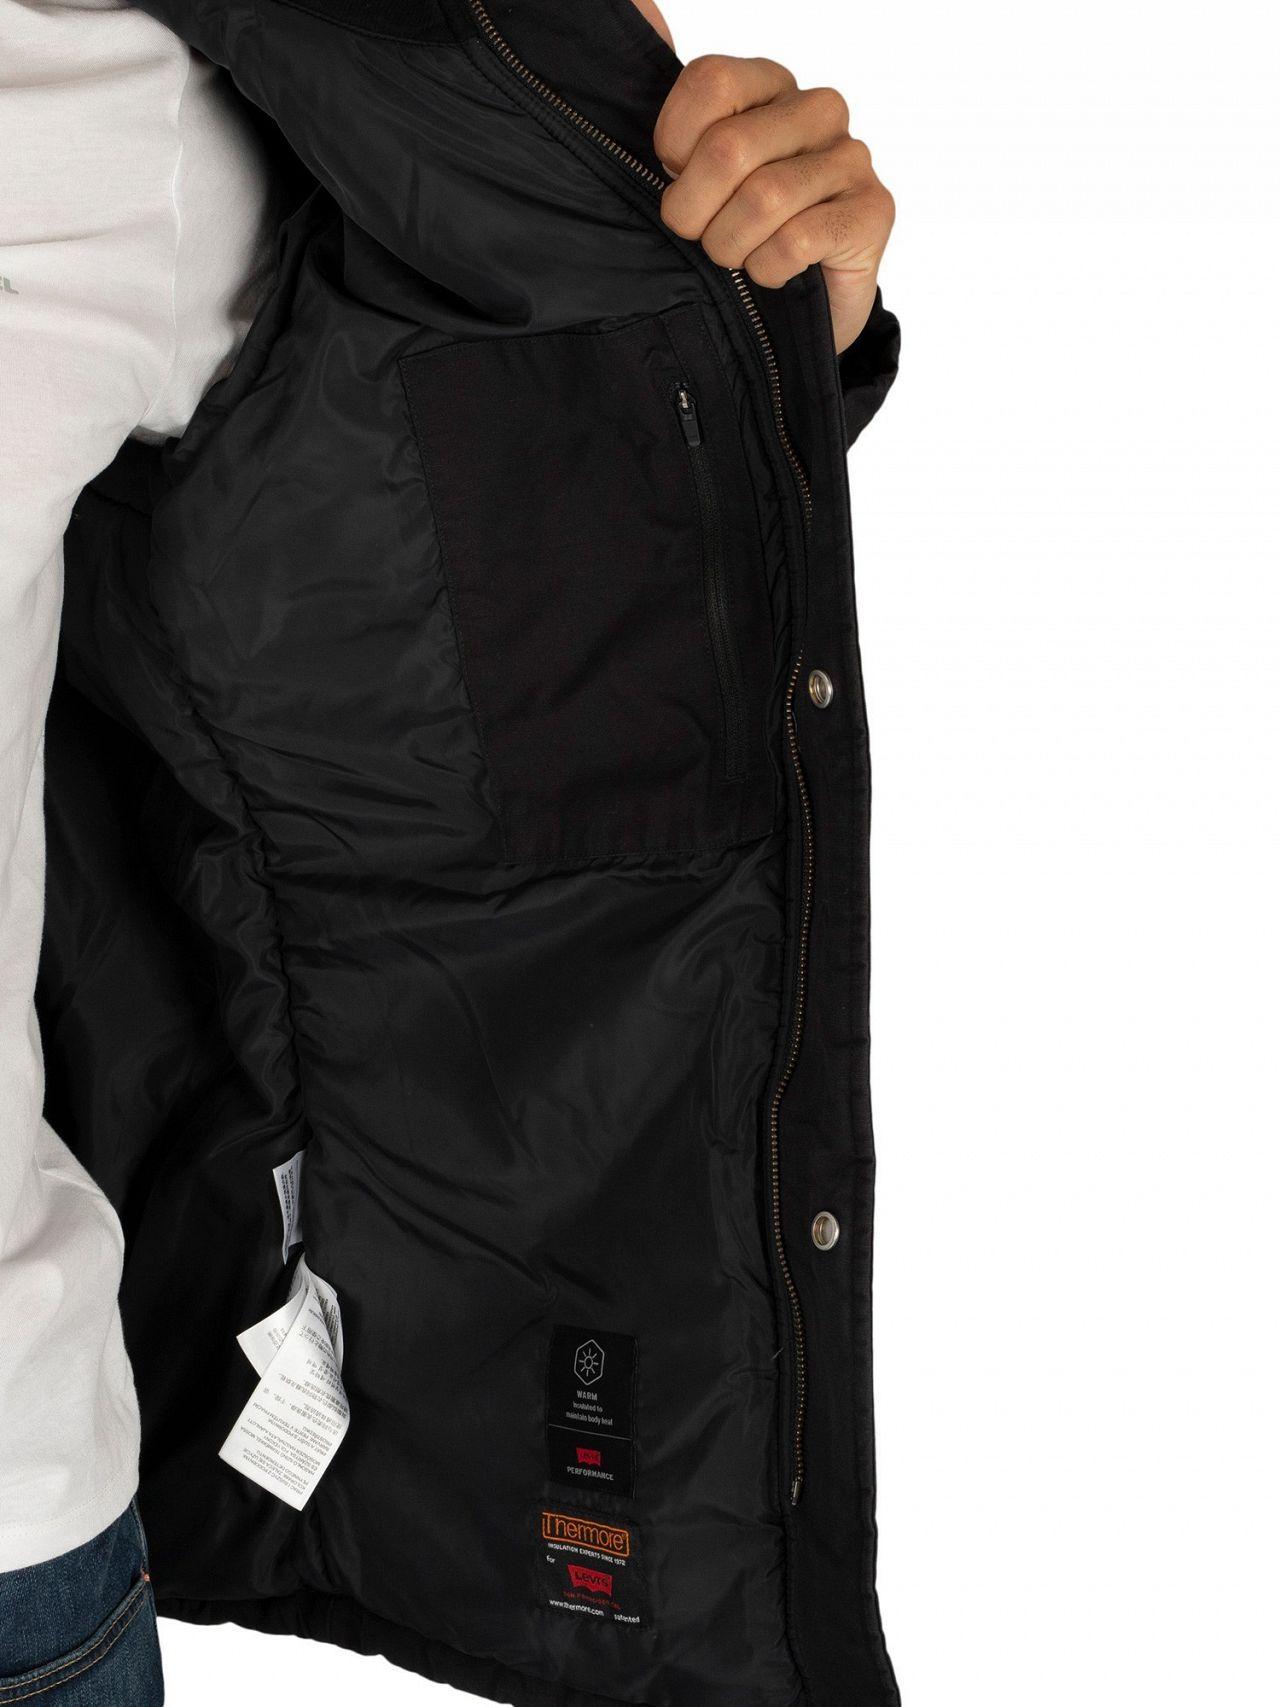 Levis Padded Parka Top Sellers, SAVE 56%.